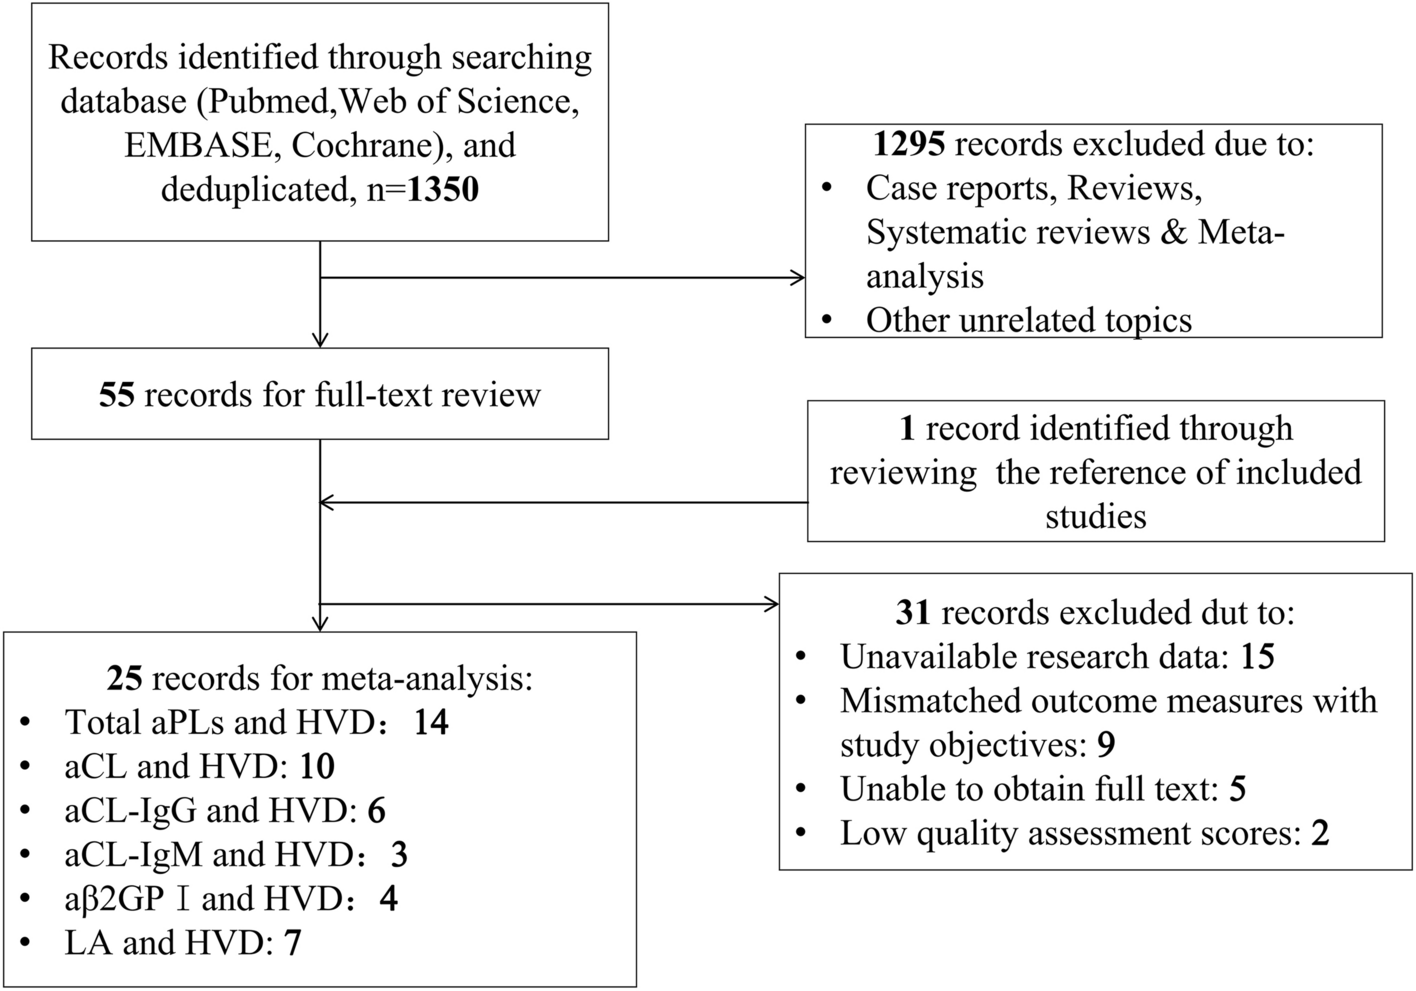 Impact of antiphospholipid antibodies on cardiac valve lesions in systemic lupus erythematosus: a systematic review and meta-analysis